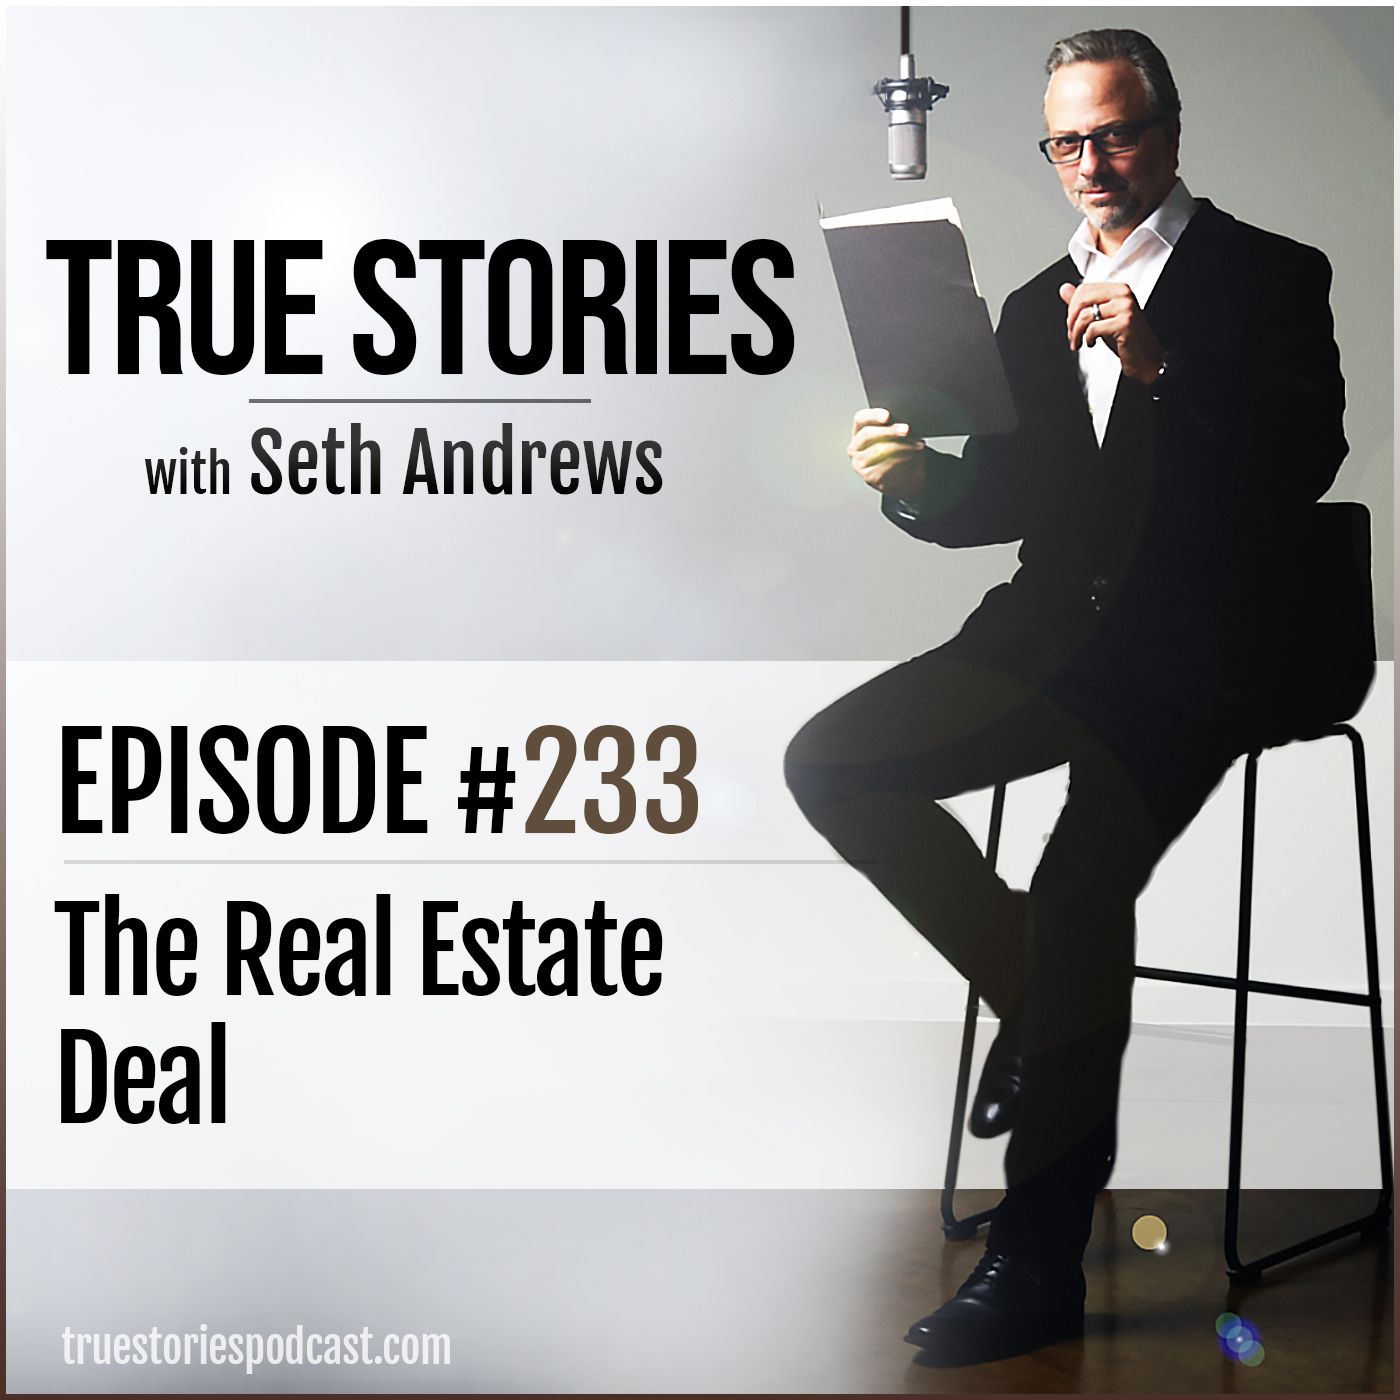 True Stories #233 - The Real Estate Deal